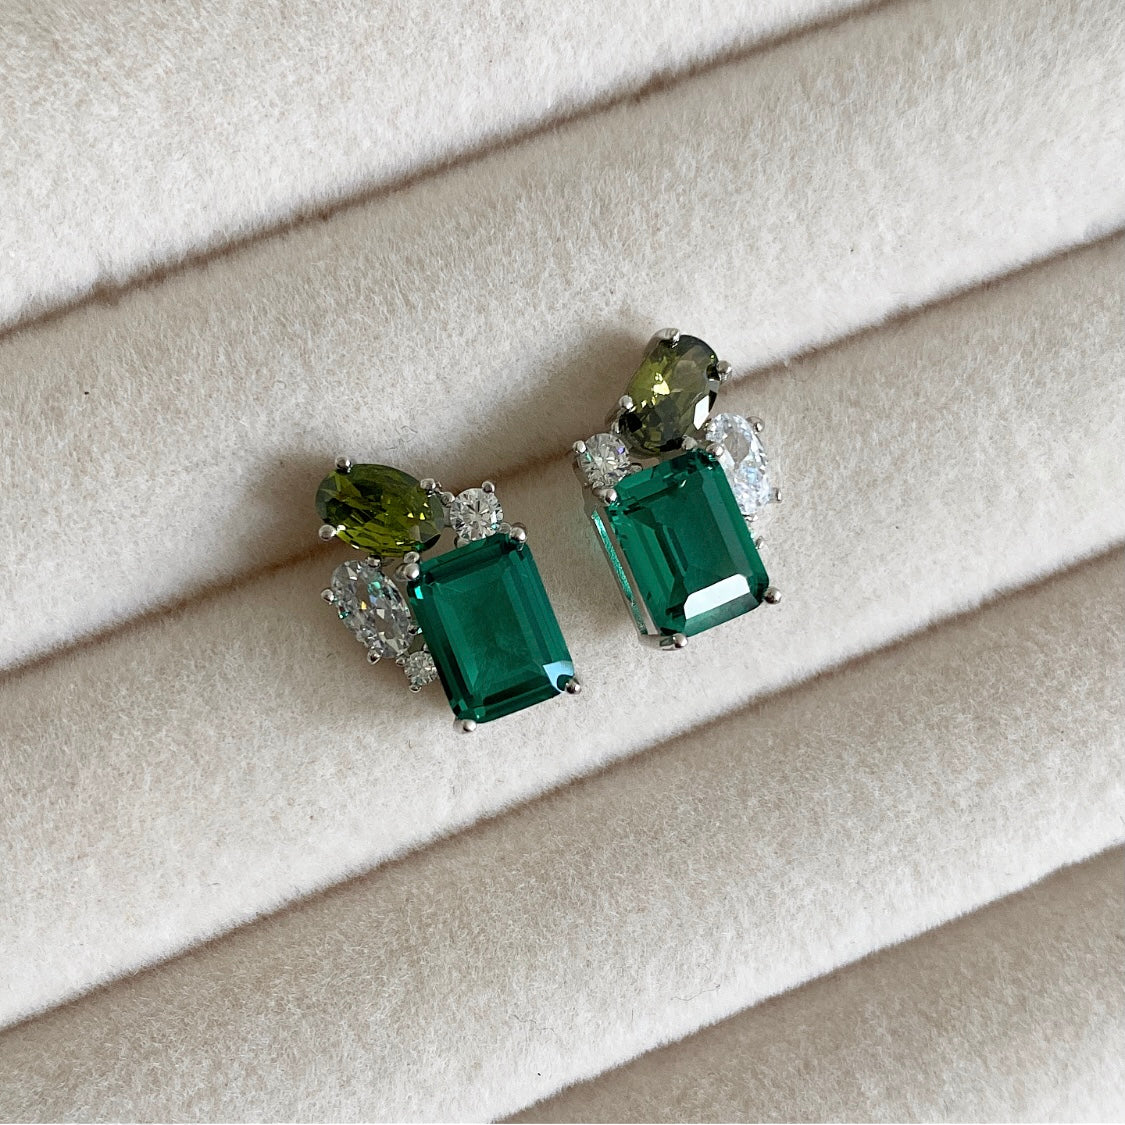 These gorgeous 925 sterling silver stud emerald earrings feature a unique blend of hues, with crystal zirconia stones in shades of green and olive. The perfect accessory to complete any classic or contemporary look. Pair with Emerald crystal necklace for a complete look. Earring drop 1.5L x 1W cm